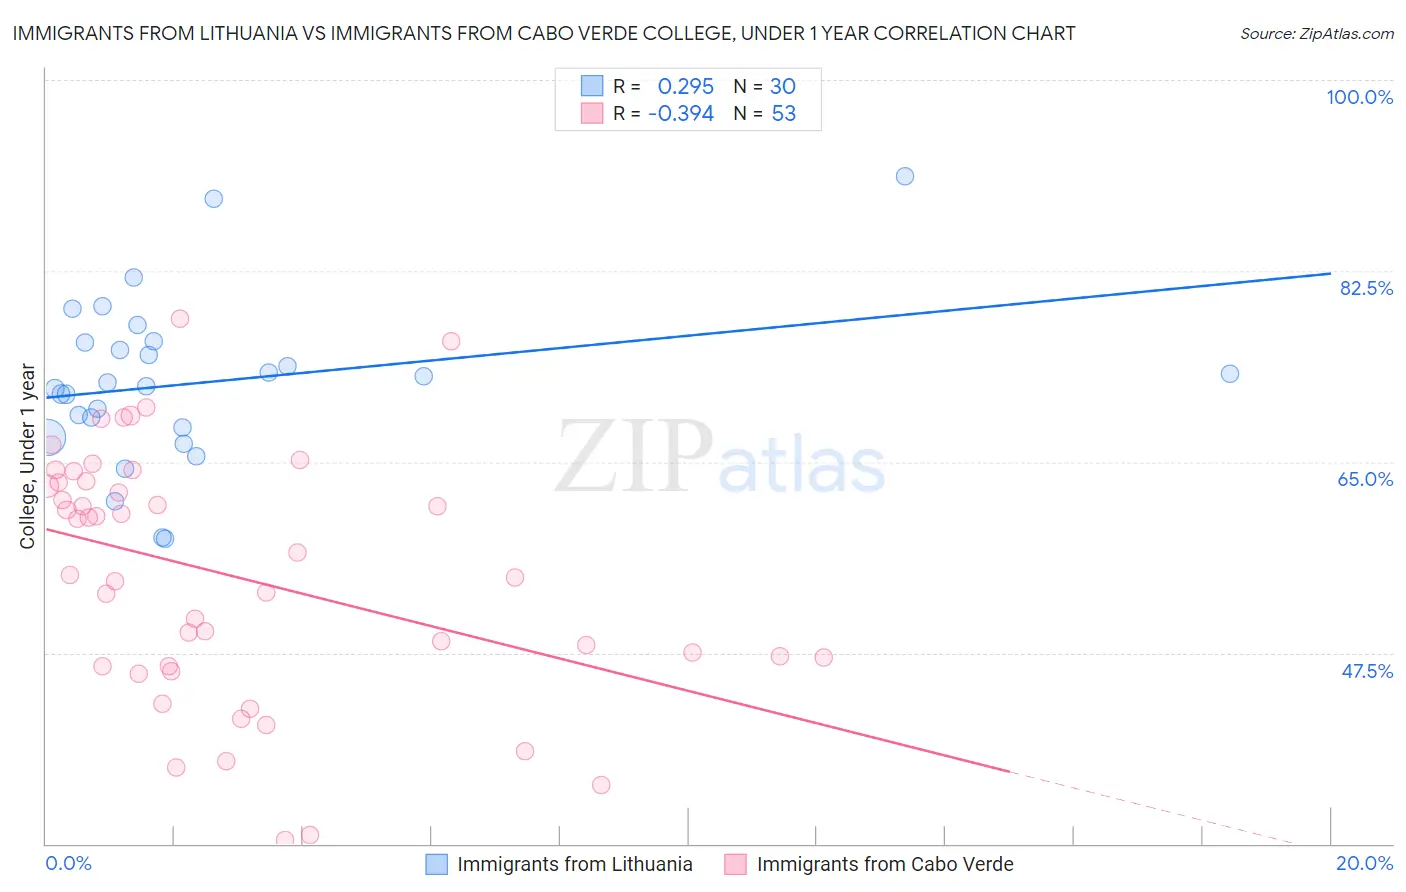 Immigrants from Lithuania vs Immigrants from Cabo Verde College, Under 1 year